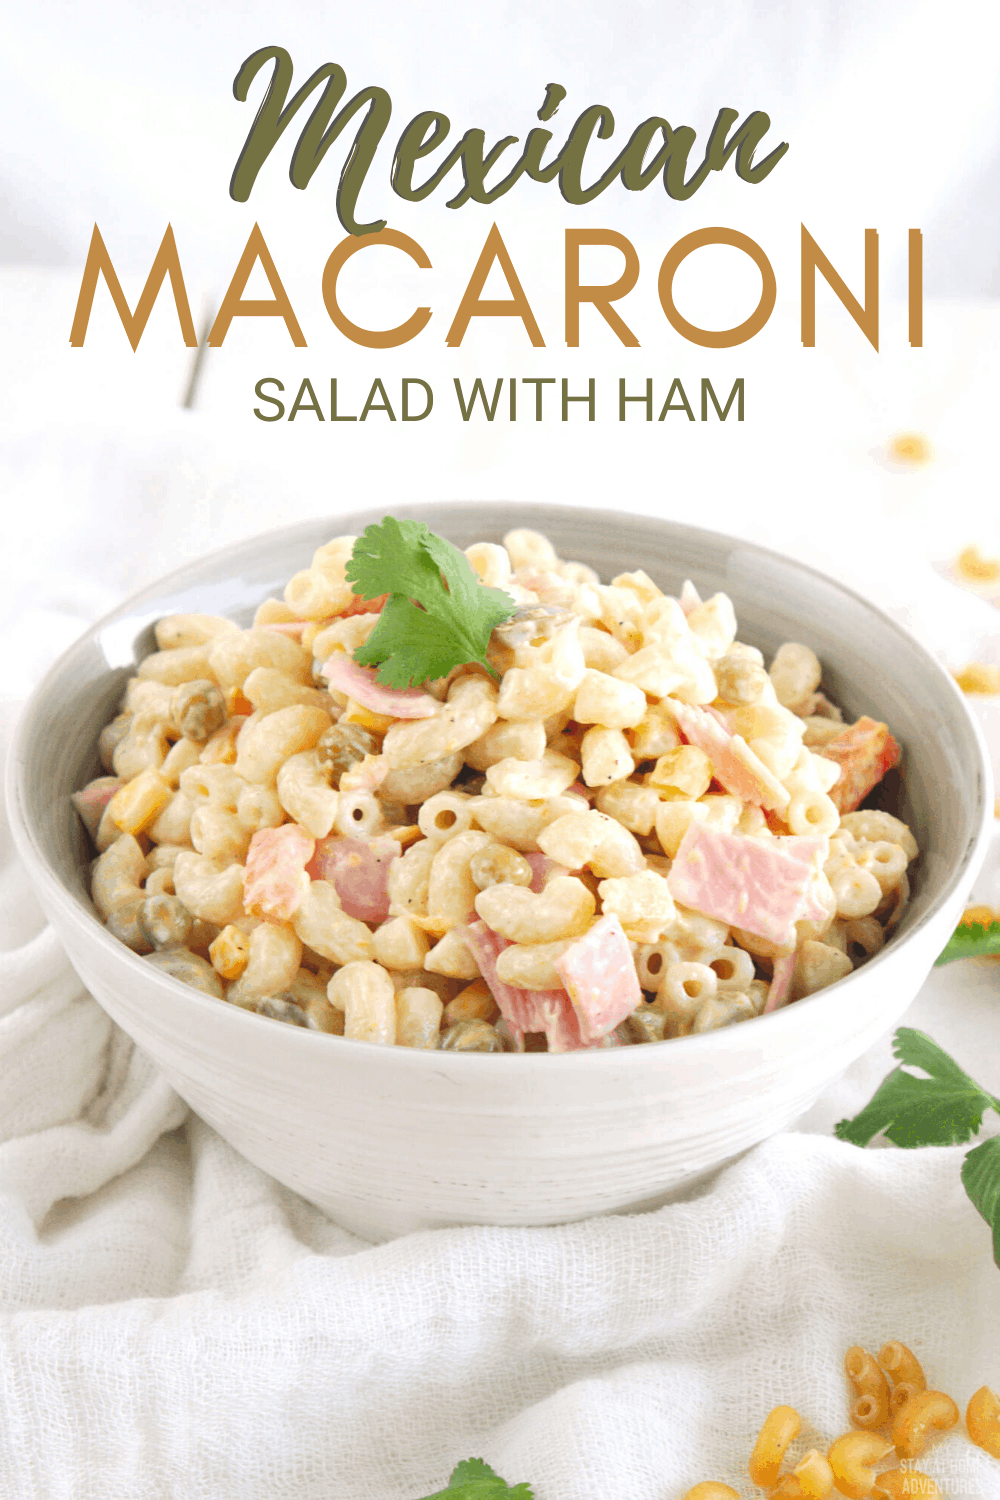 Mexican Macaroni Salad recipe it's an authentic, simple, and flavorful pasta dish that comes together with ingredients you probably already have in your kitchen. Serve as a light main dish or as a side dish. #mexicanrecipe #pastasalad via @mystayathome